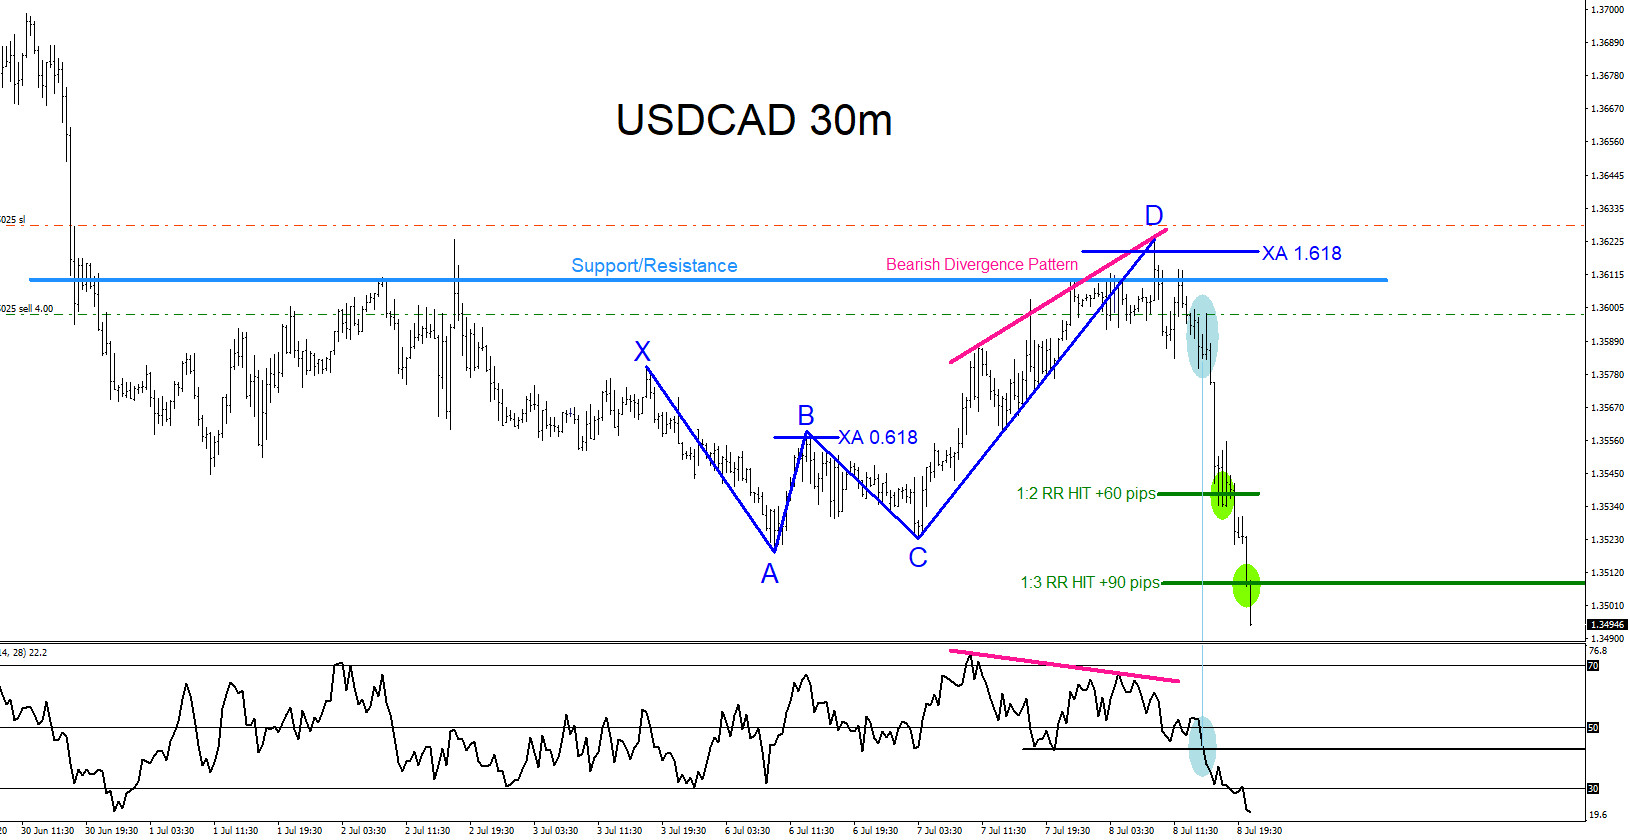 USDCAD : Market Patterns Signalling the Move Lower